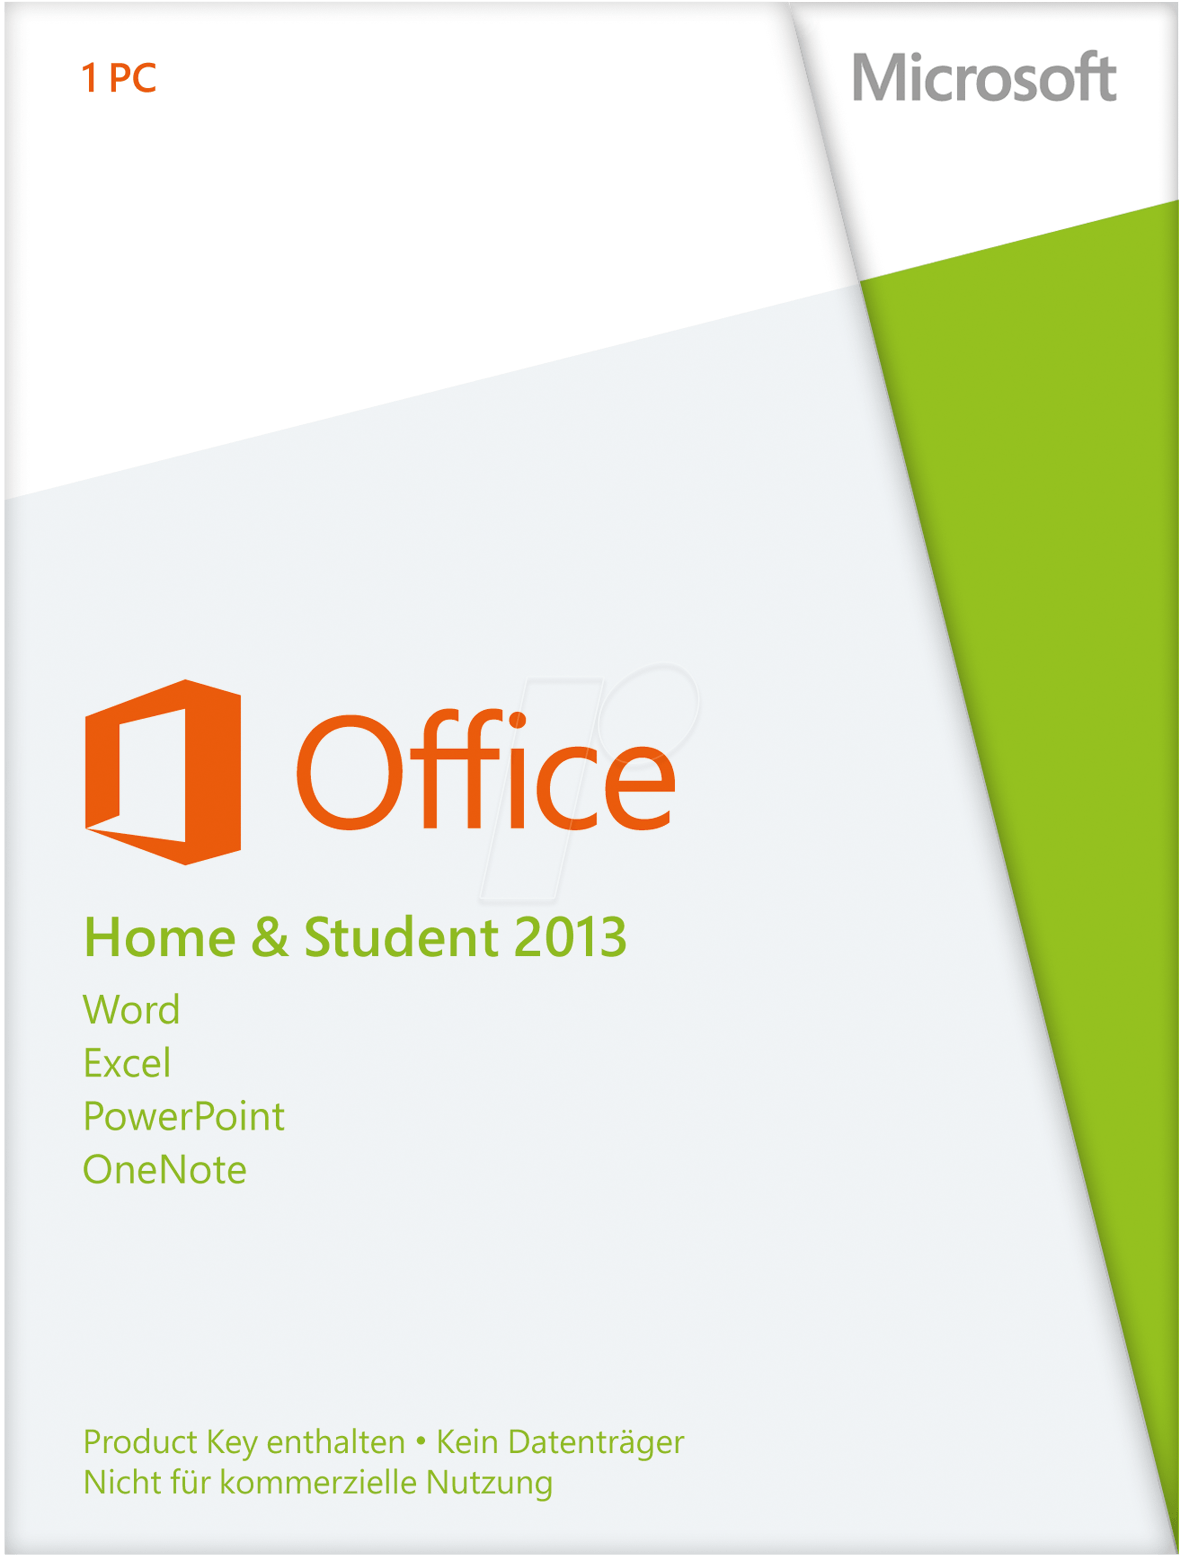 how can a student download microsoft office for free